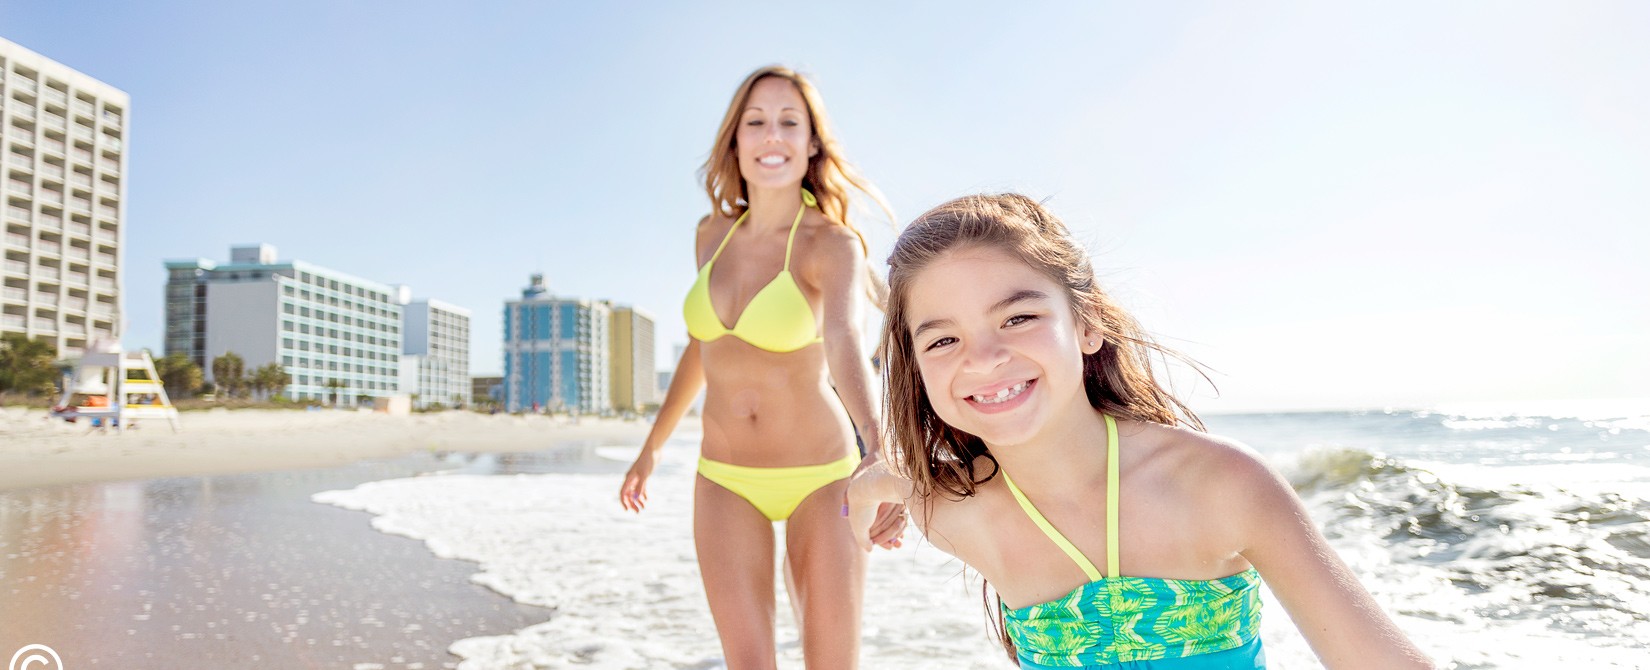 Myrtle Beach Vacations: Hotel & Vacation Planning Guide